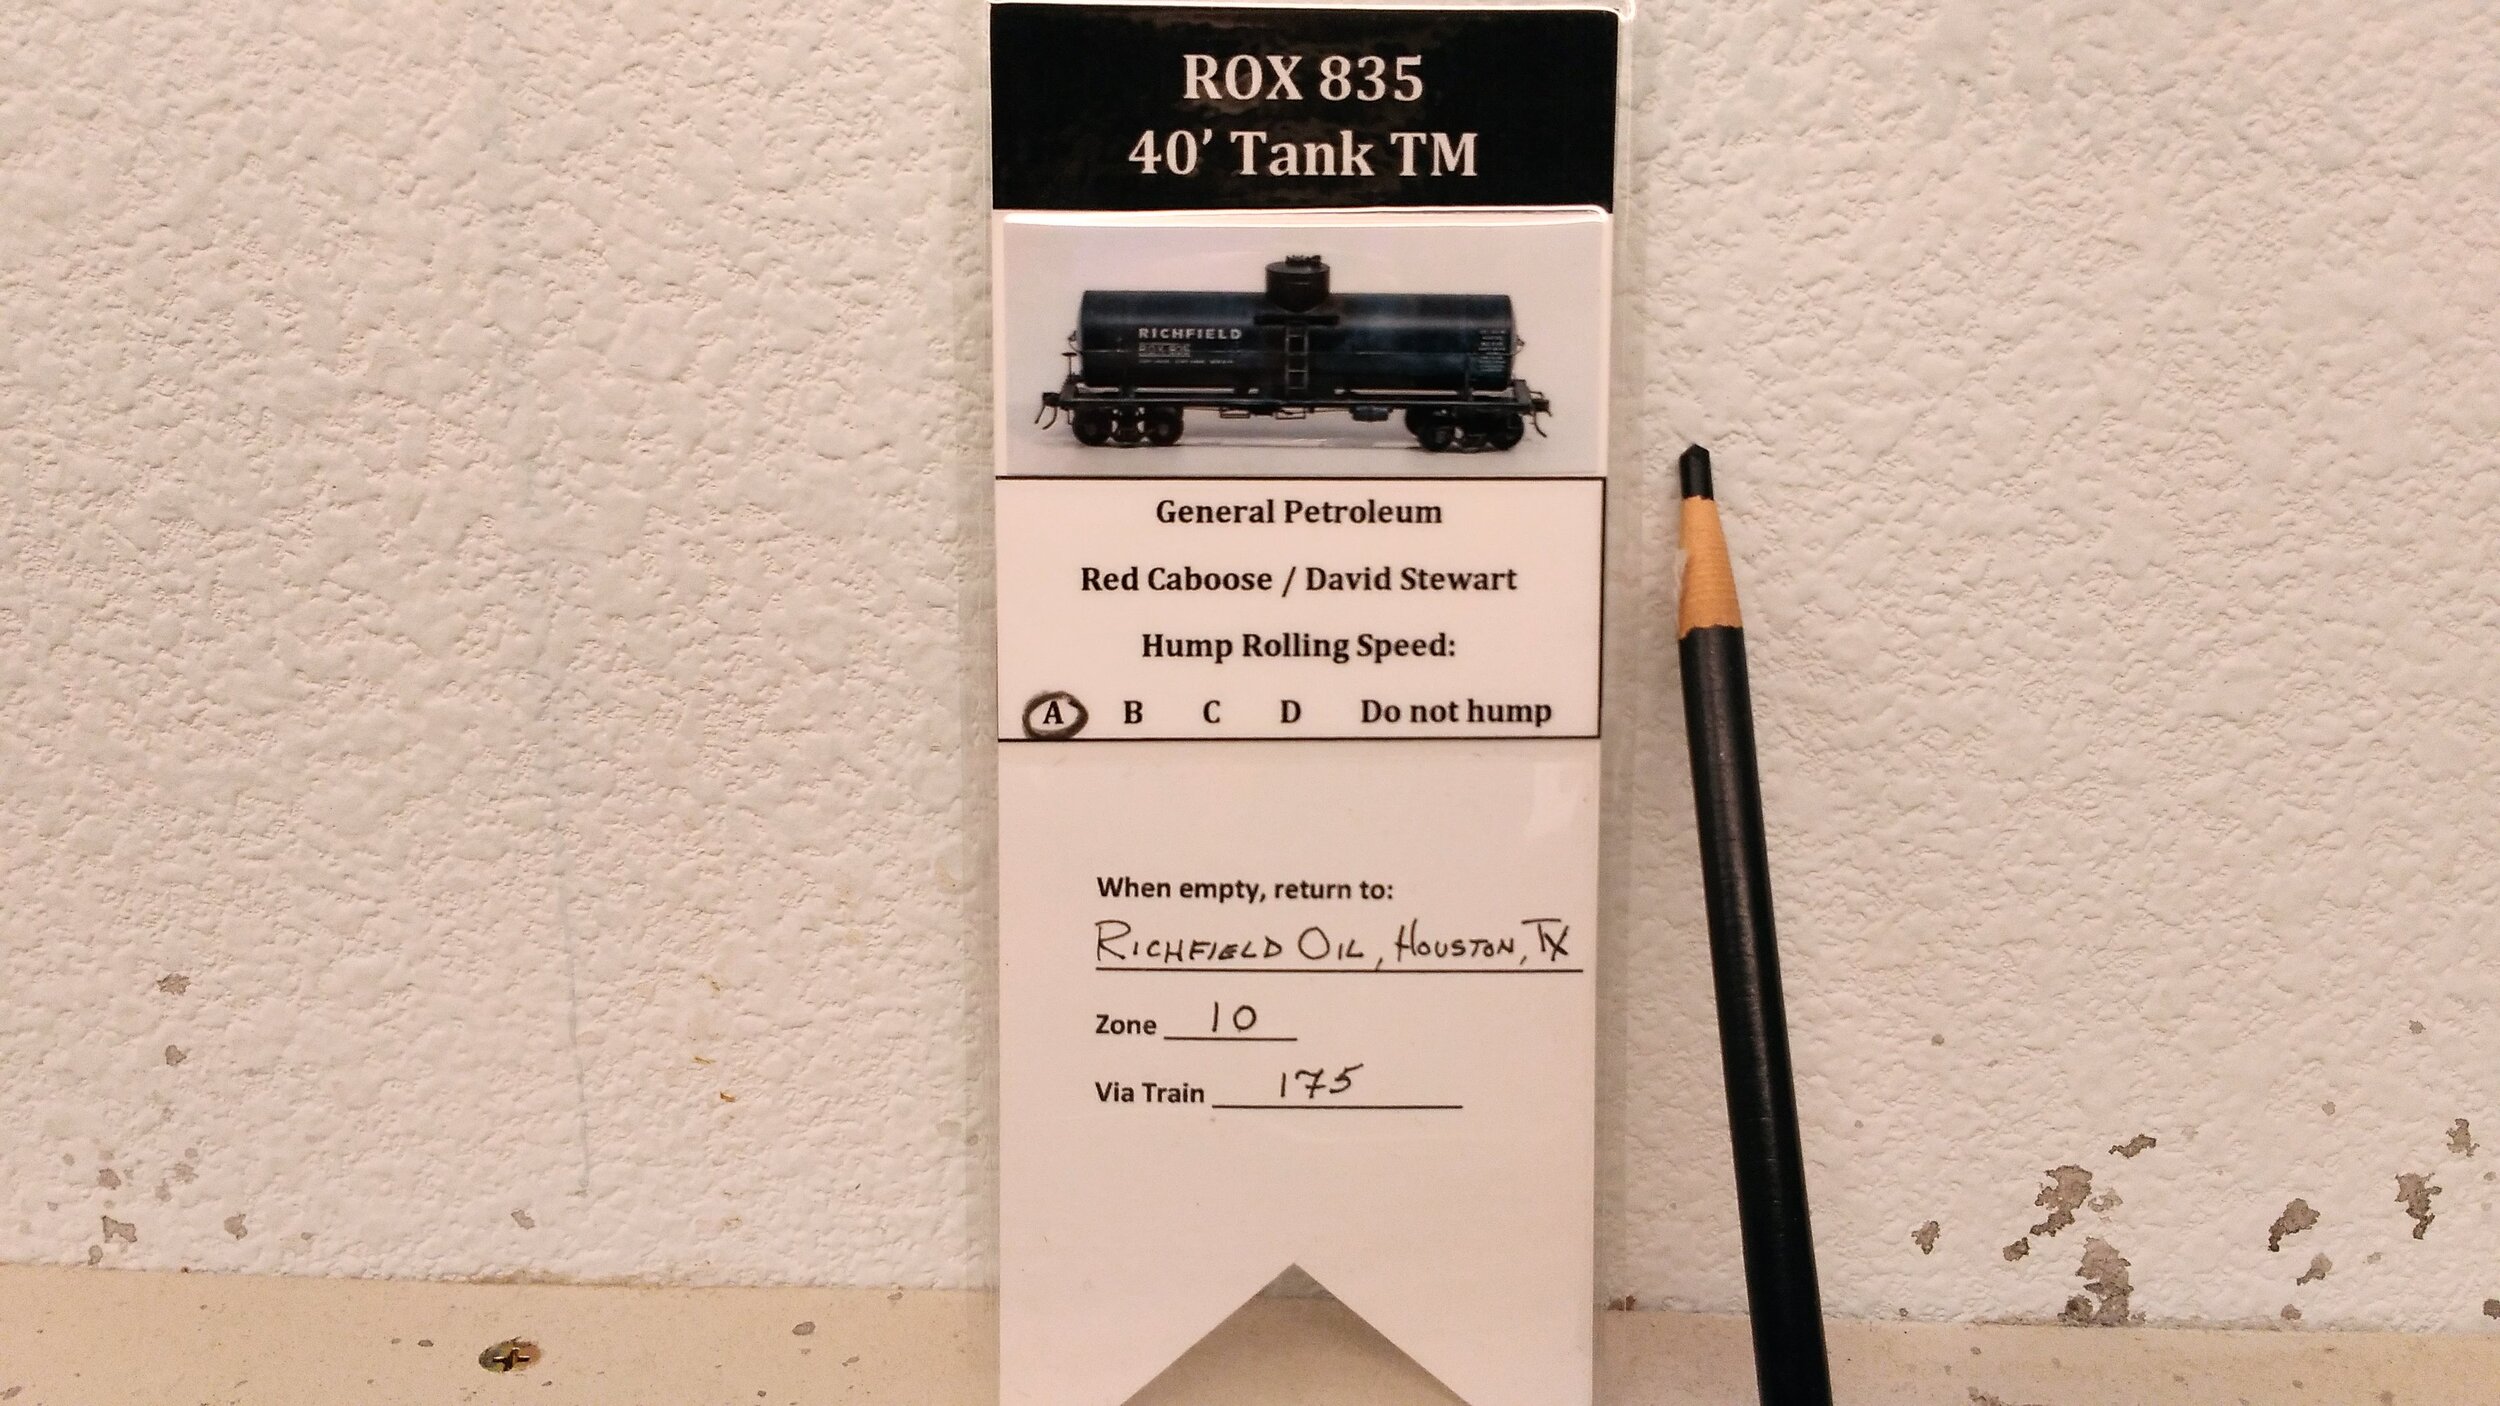  Finally ROX835 is ready for service by circling “A” on the car card. This was previously done with a grease pencil, but now with a Sharpie as the grease pencil proved too easily removed by handling.  The “Hump Rolling Speed” is a guide for the hump 